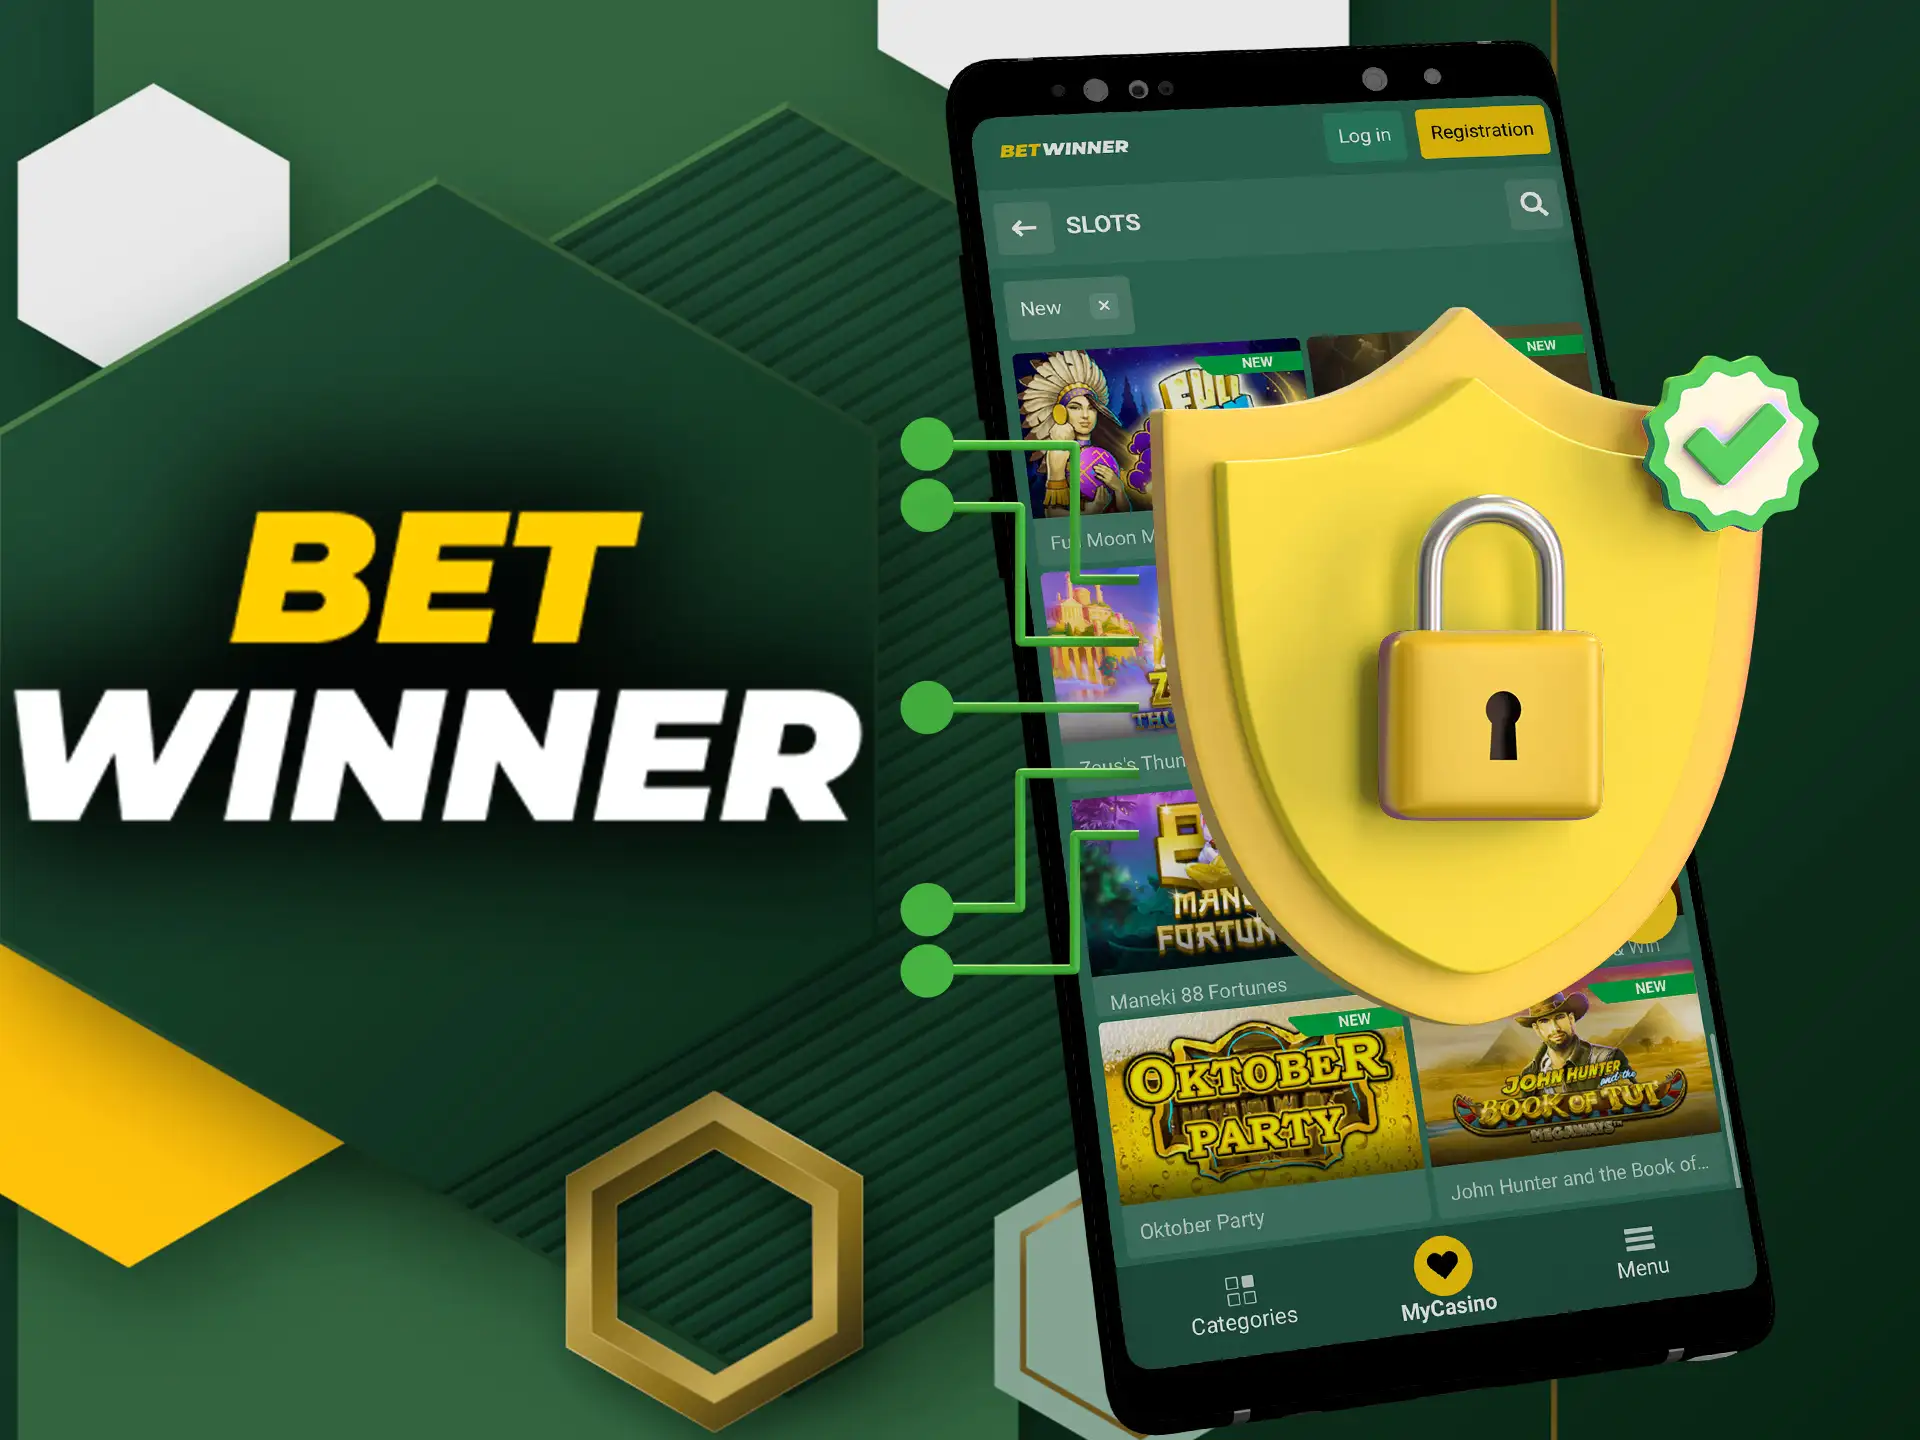 Betwinner protects all of its users' personal data with modern encryption technology.